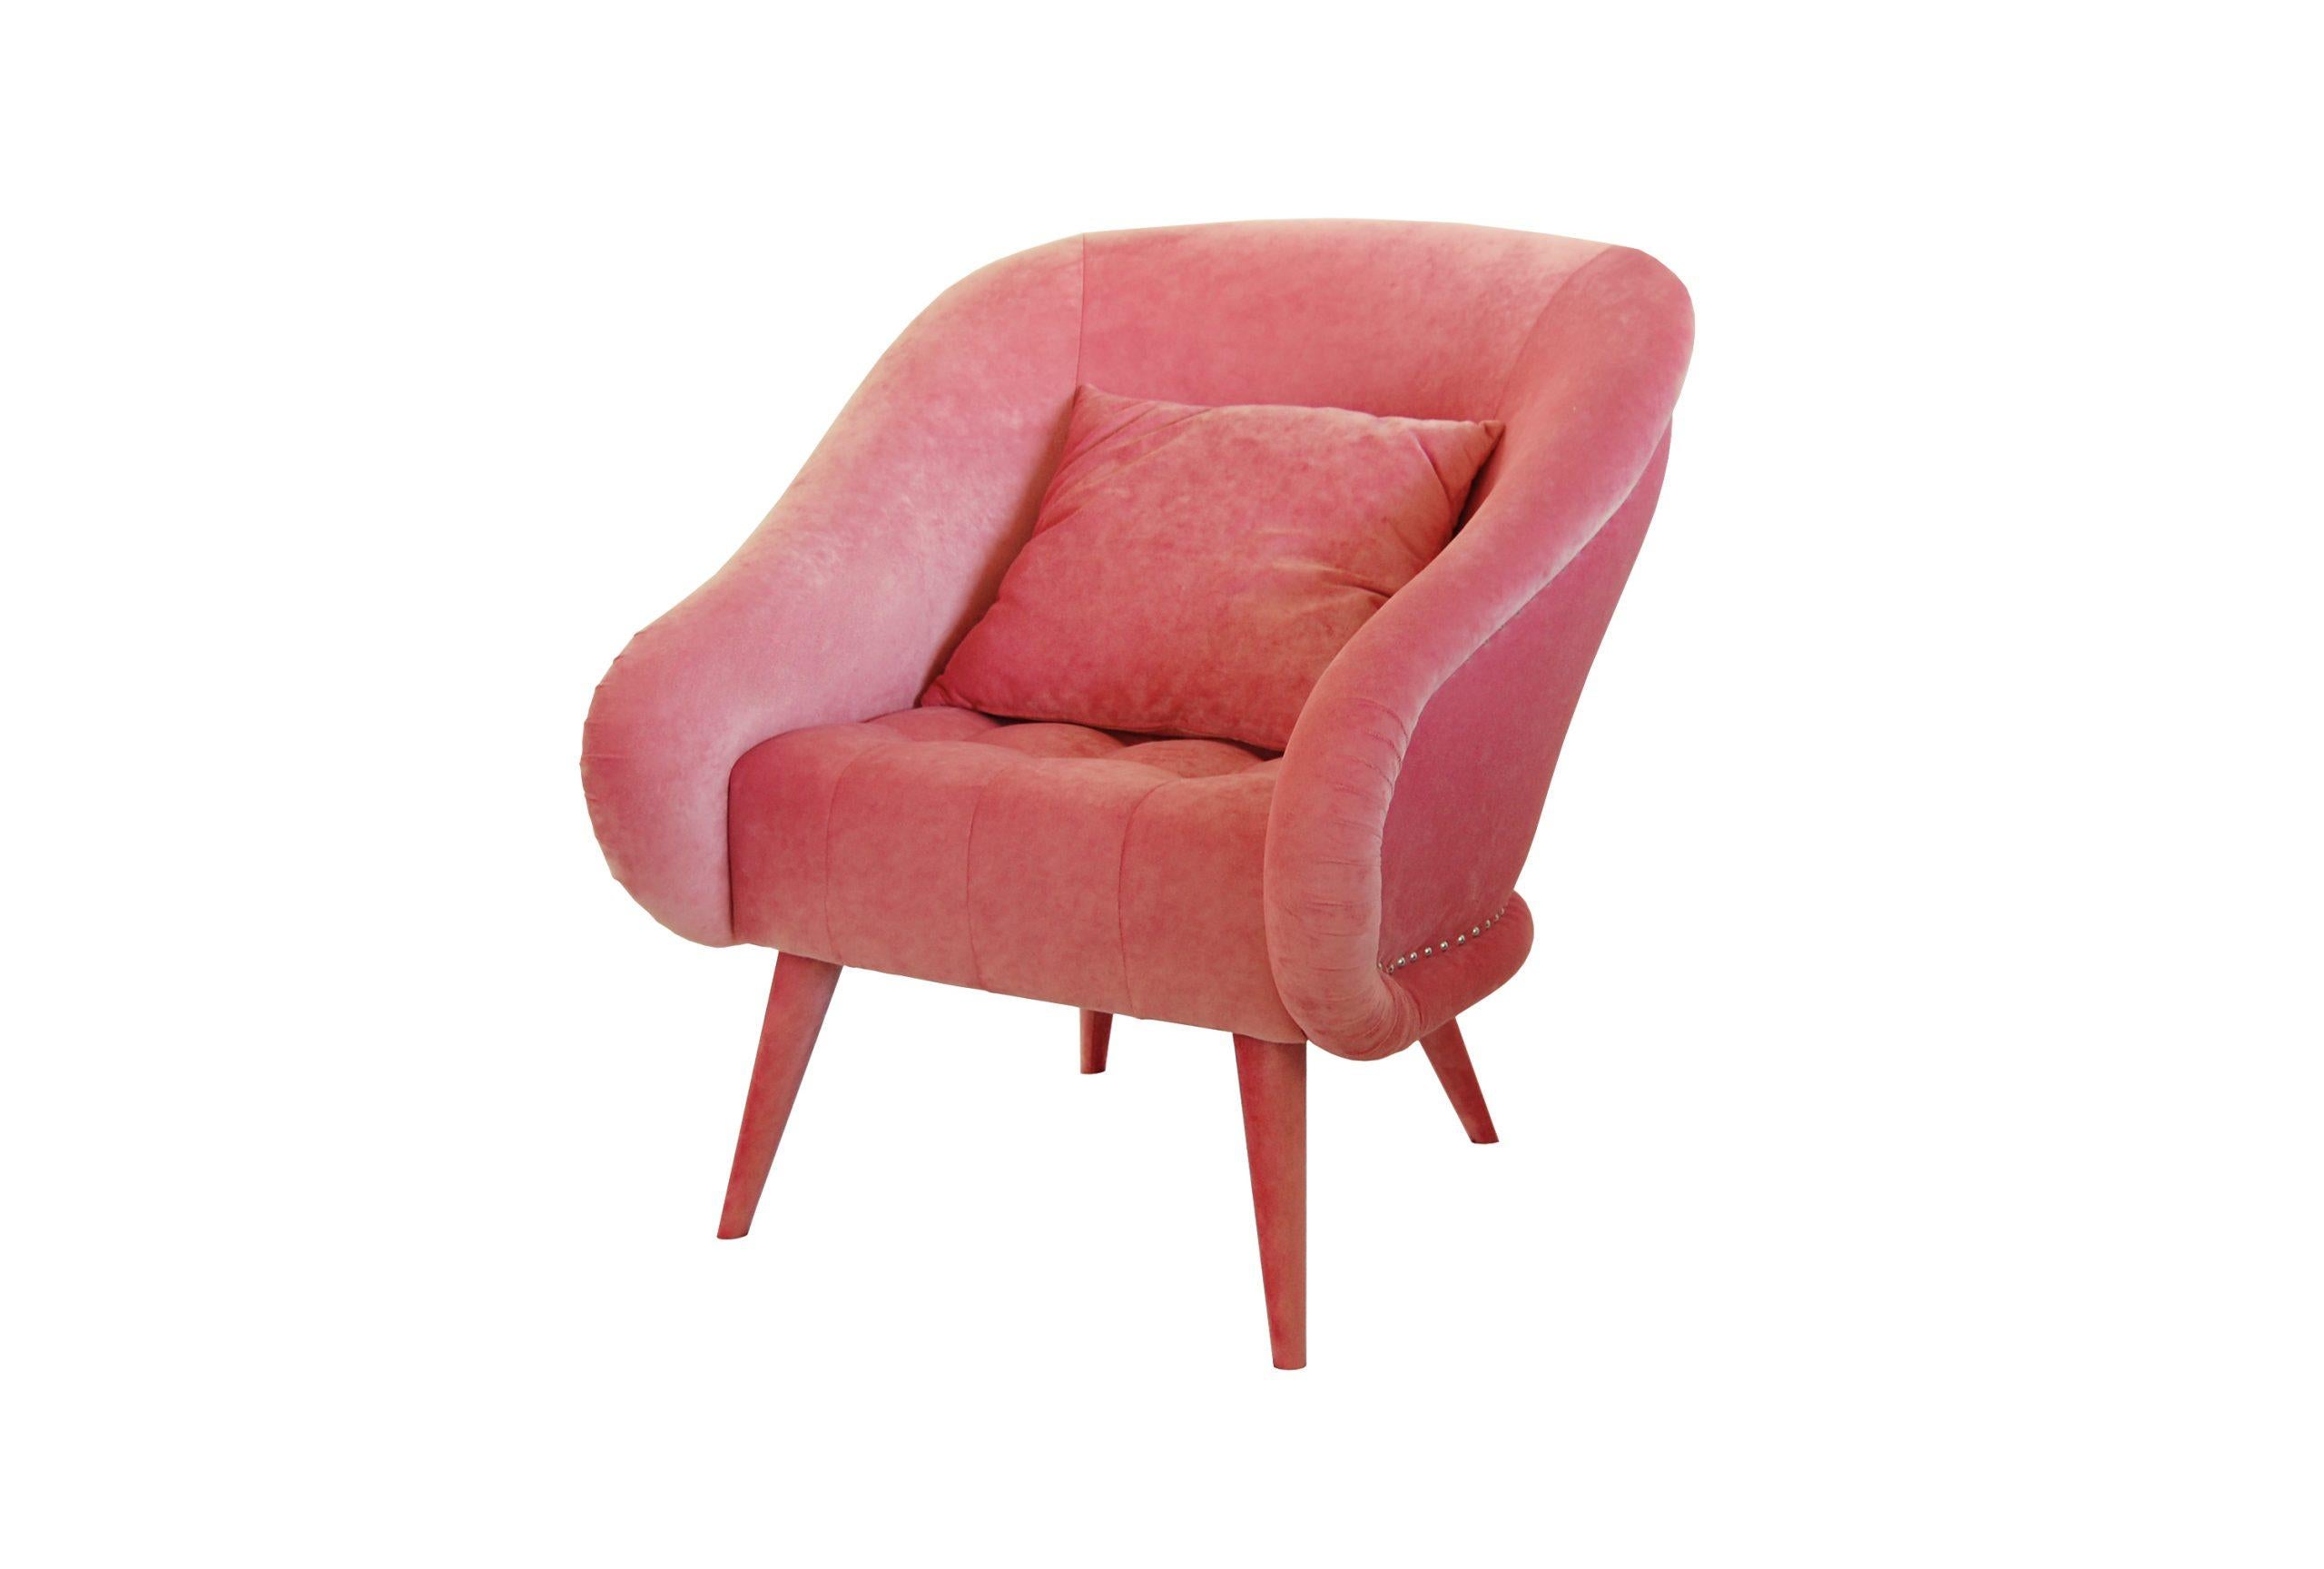 The silhouette and structure of this piece are immediately familiar, reminiscent of the art deco armchair with a modern, clean design. The seat, backrest, arms and legs are all covered with luxurious cotton velvet upholstering. The arms and backrest